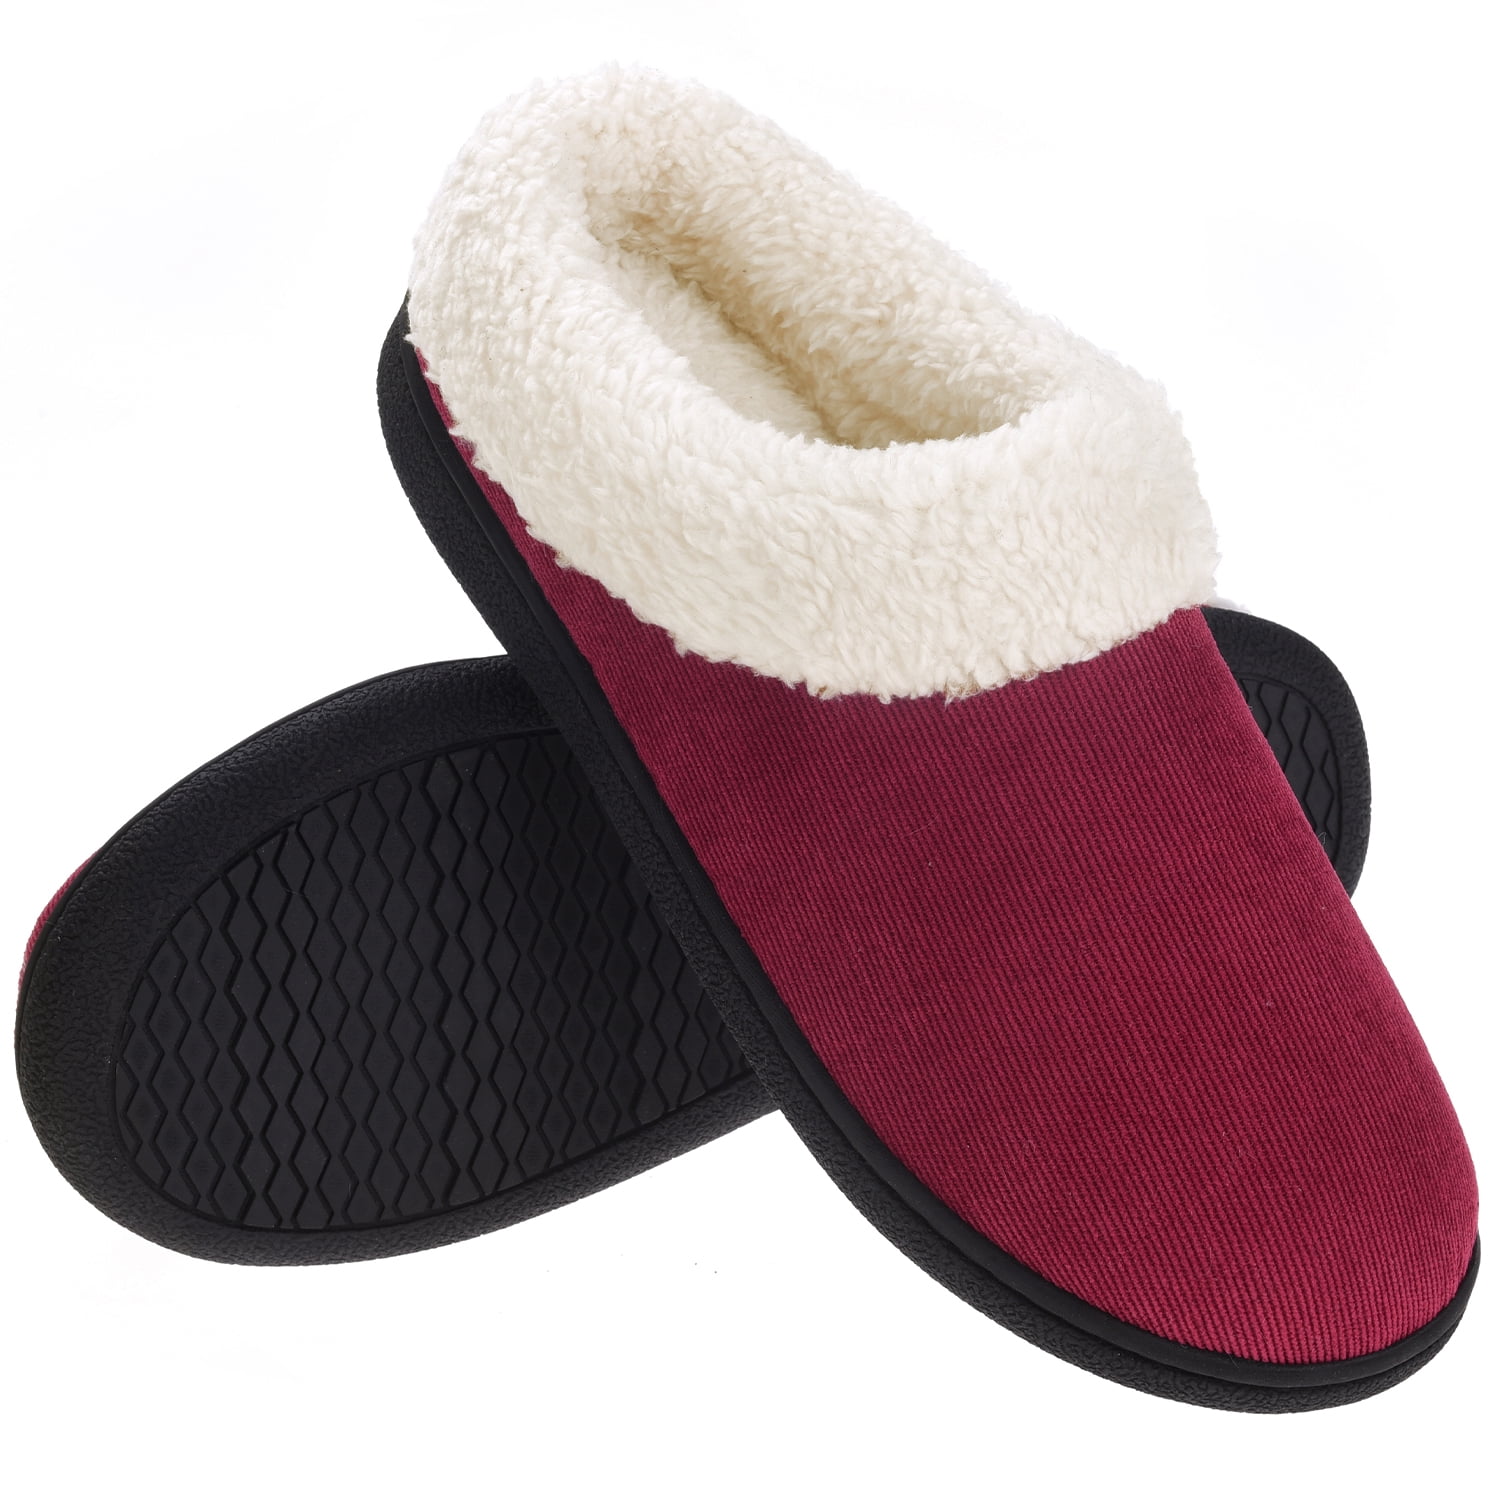 Women Slippers Memory Foam Fluffy Warm Comfy Soft Fuzzy Plush Non Slip House Shoes for Indoor & Outdoor Use 